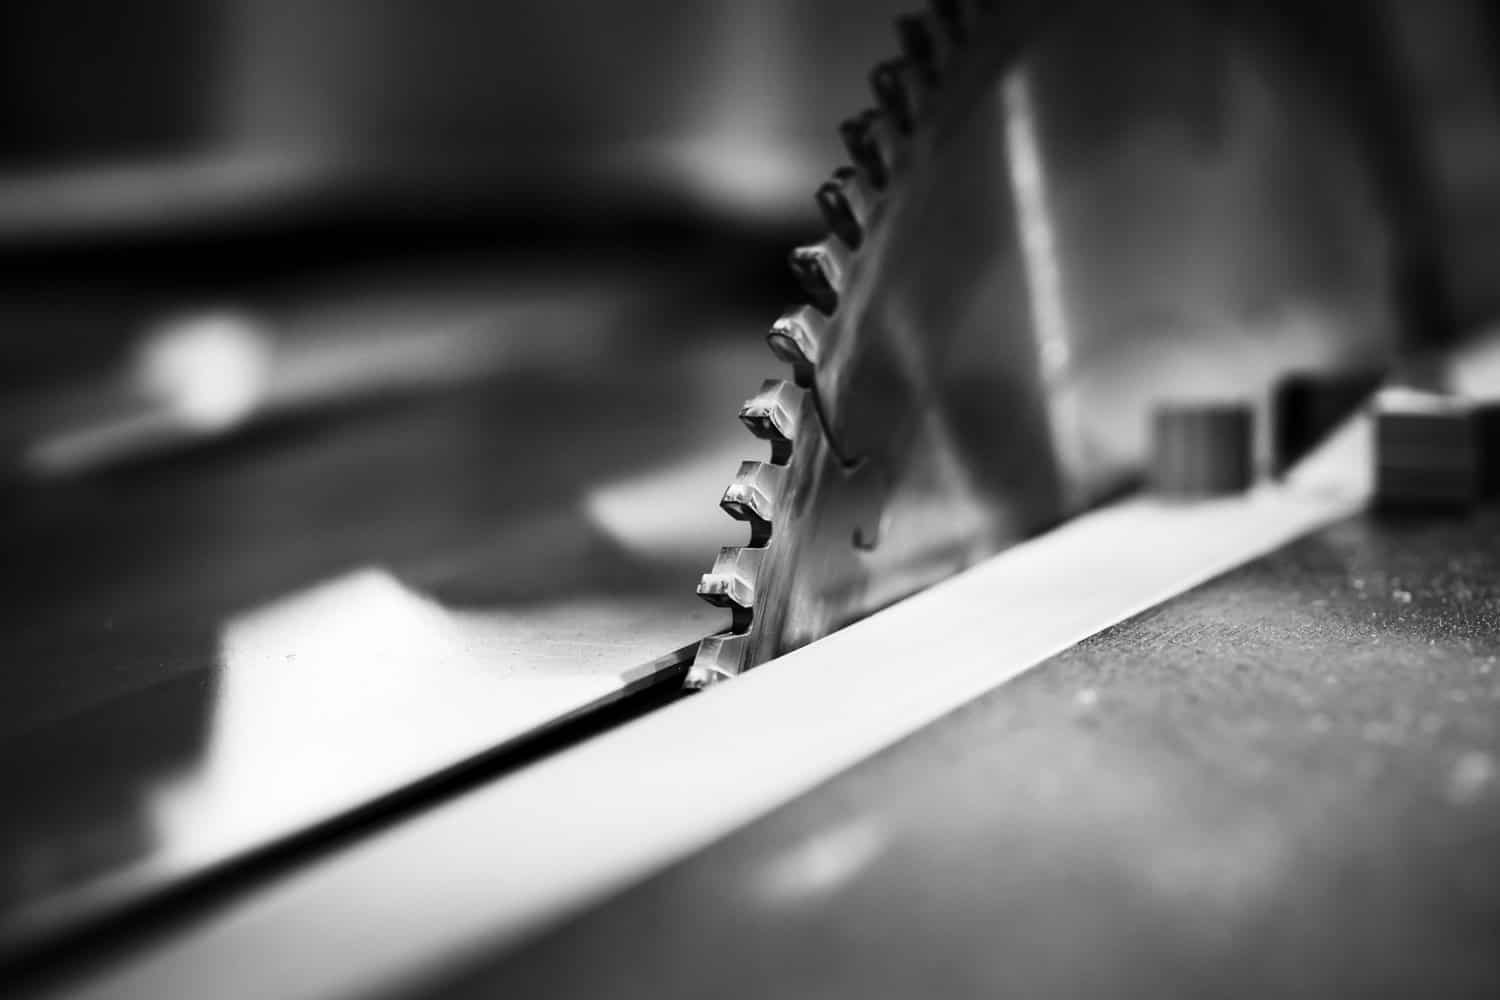 Circular table saw disc with carbide teeth, close-up black and white photo with selective focus